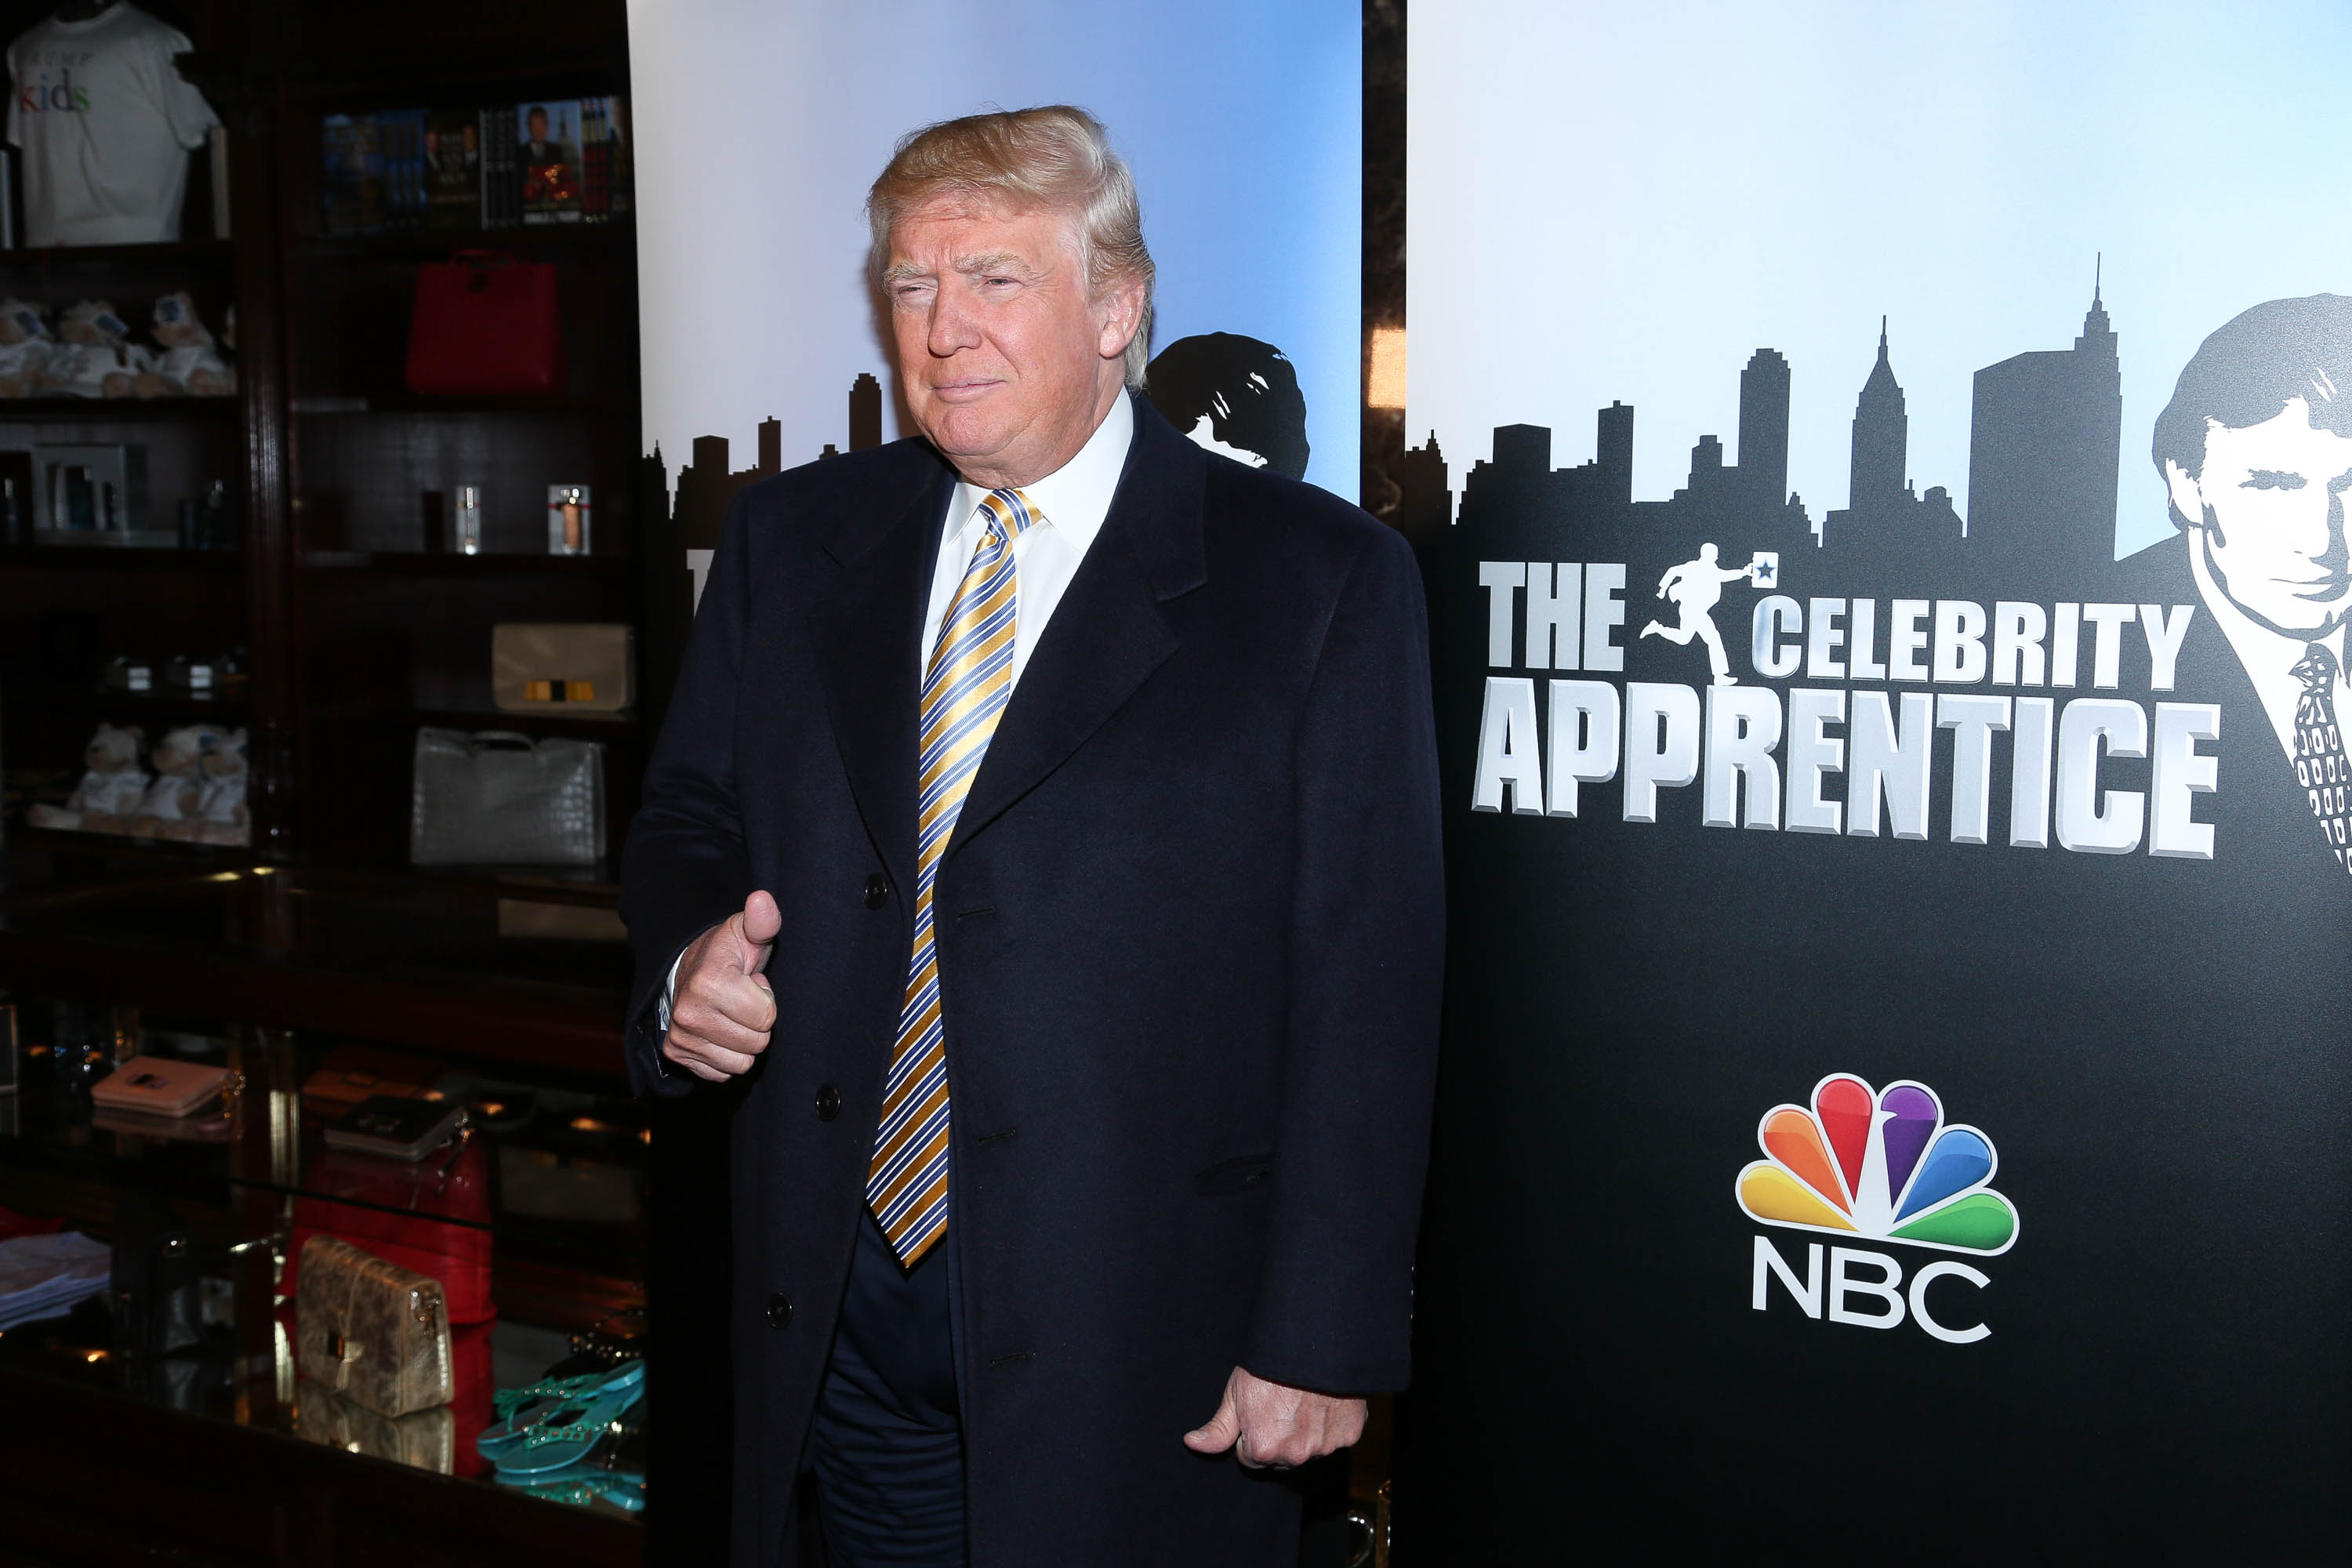 Movie Investor Upset by Depiction of Trump in ‘The Apprentice’: Report